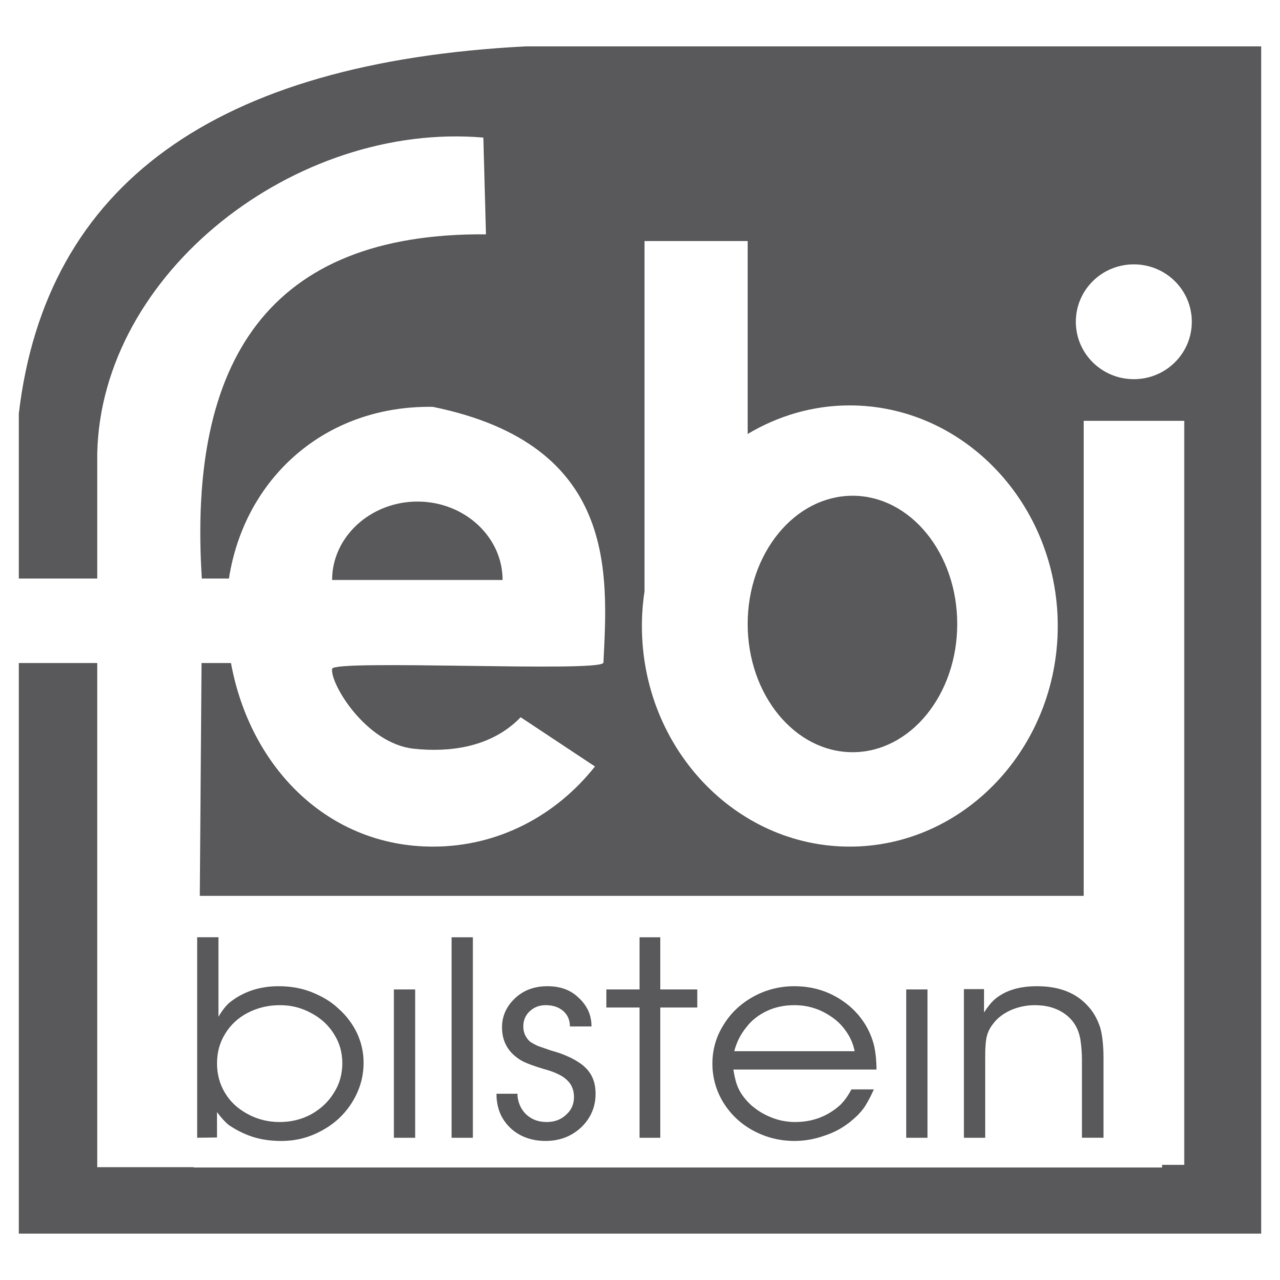 Download Febi Bilstein Logo Png And Vector Pdf Svg Ai Eps Free